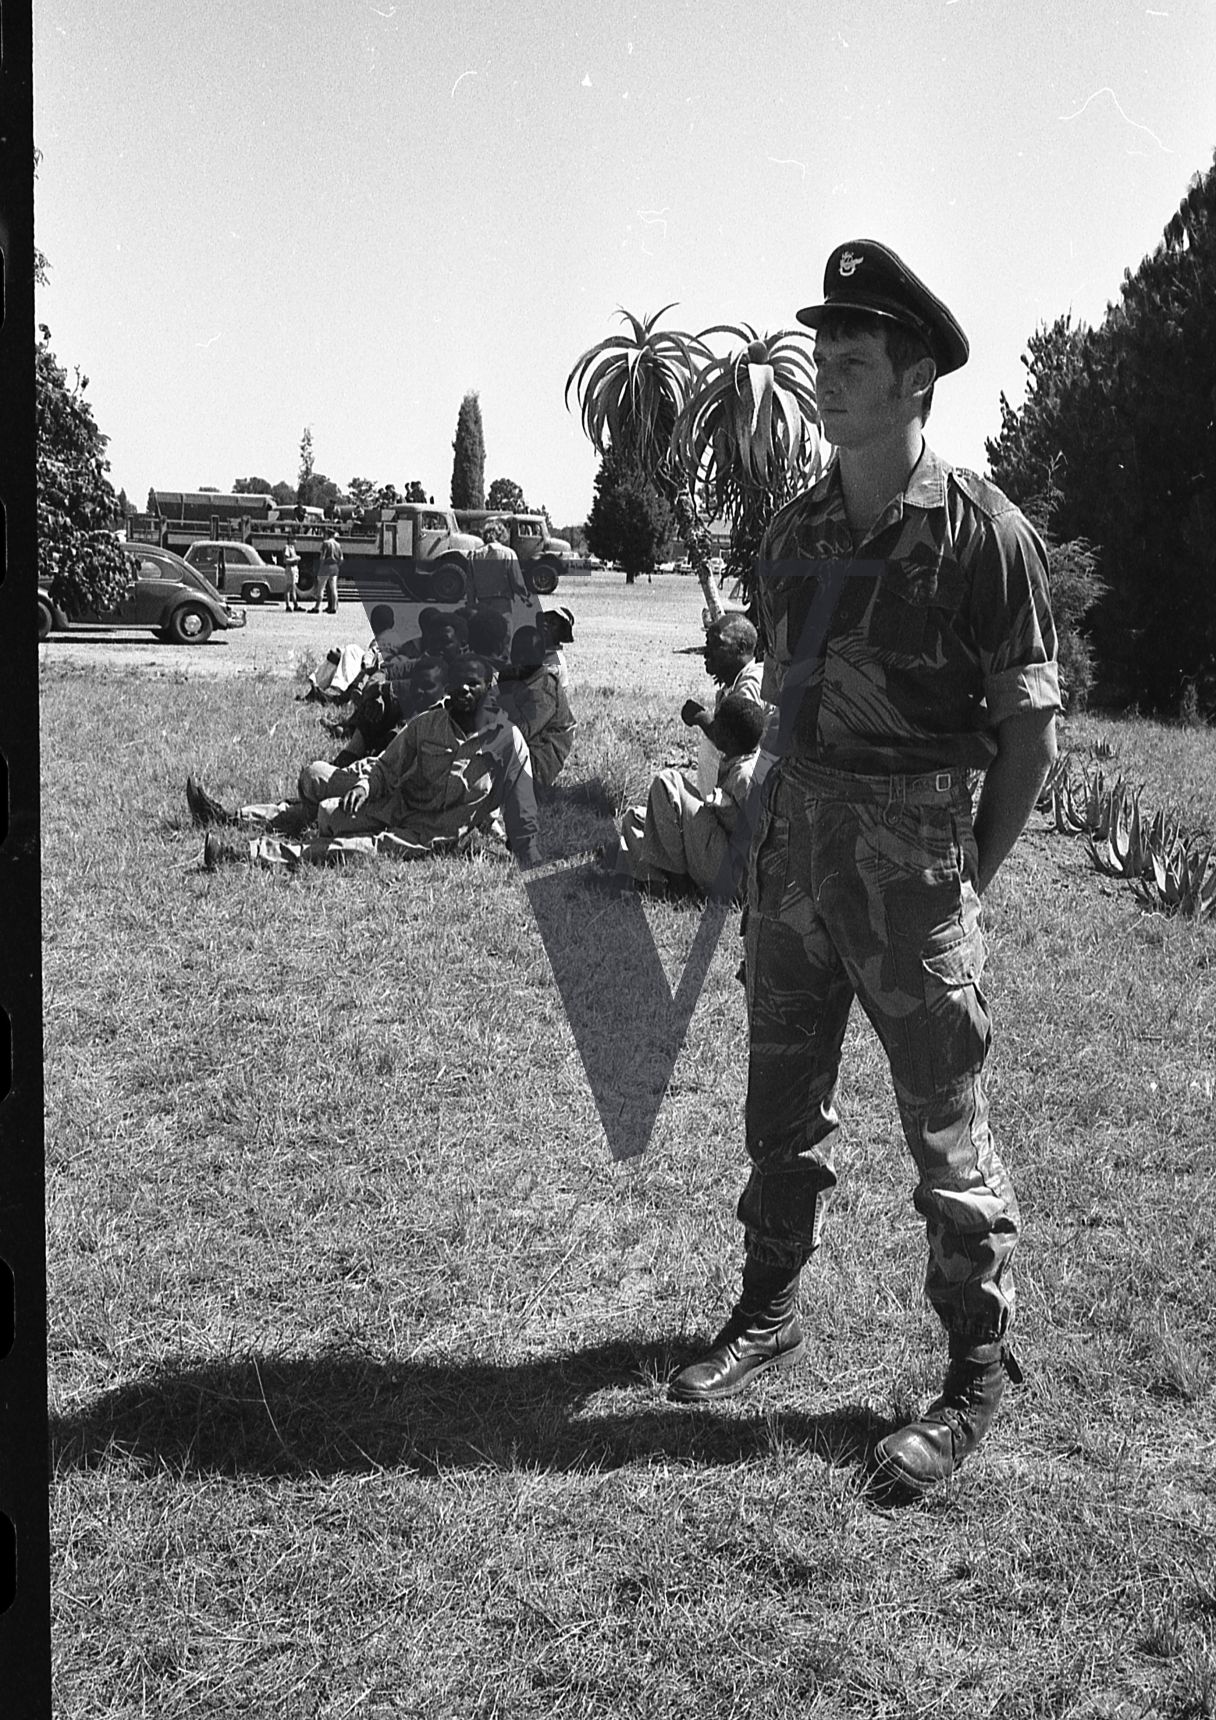 Rhodesia, Rhodesian Light Infantry, passing out ceremony, ranked soldier, full shot.